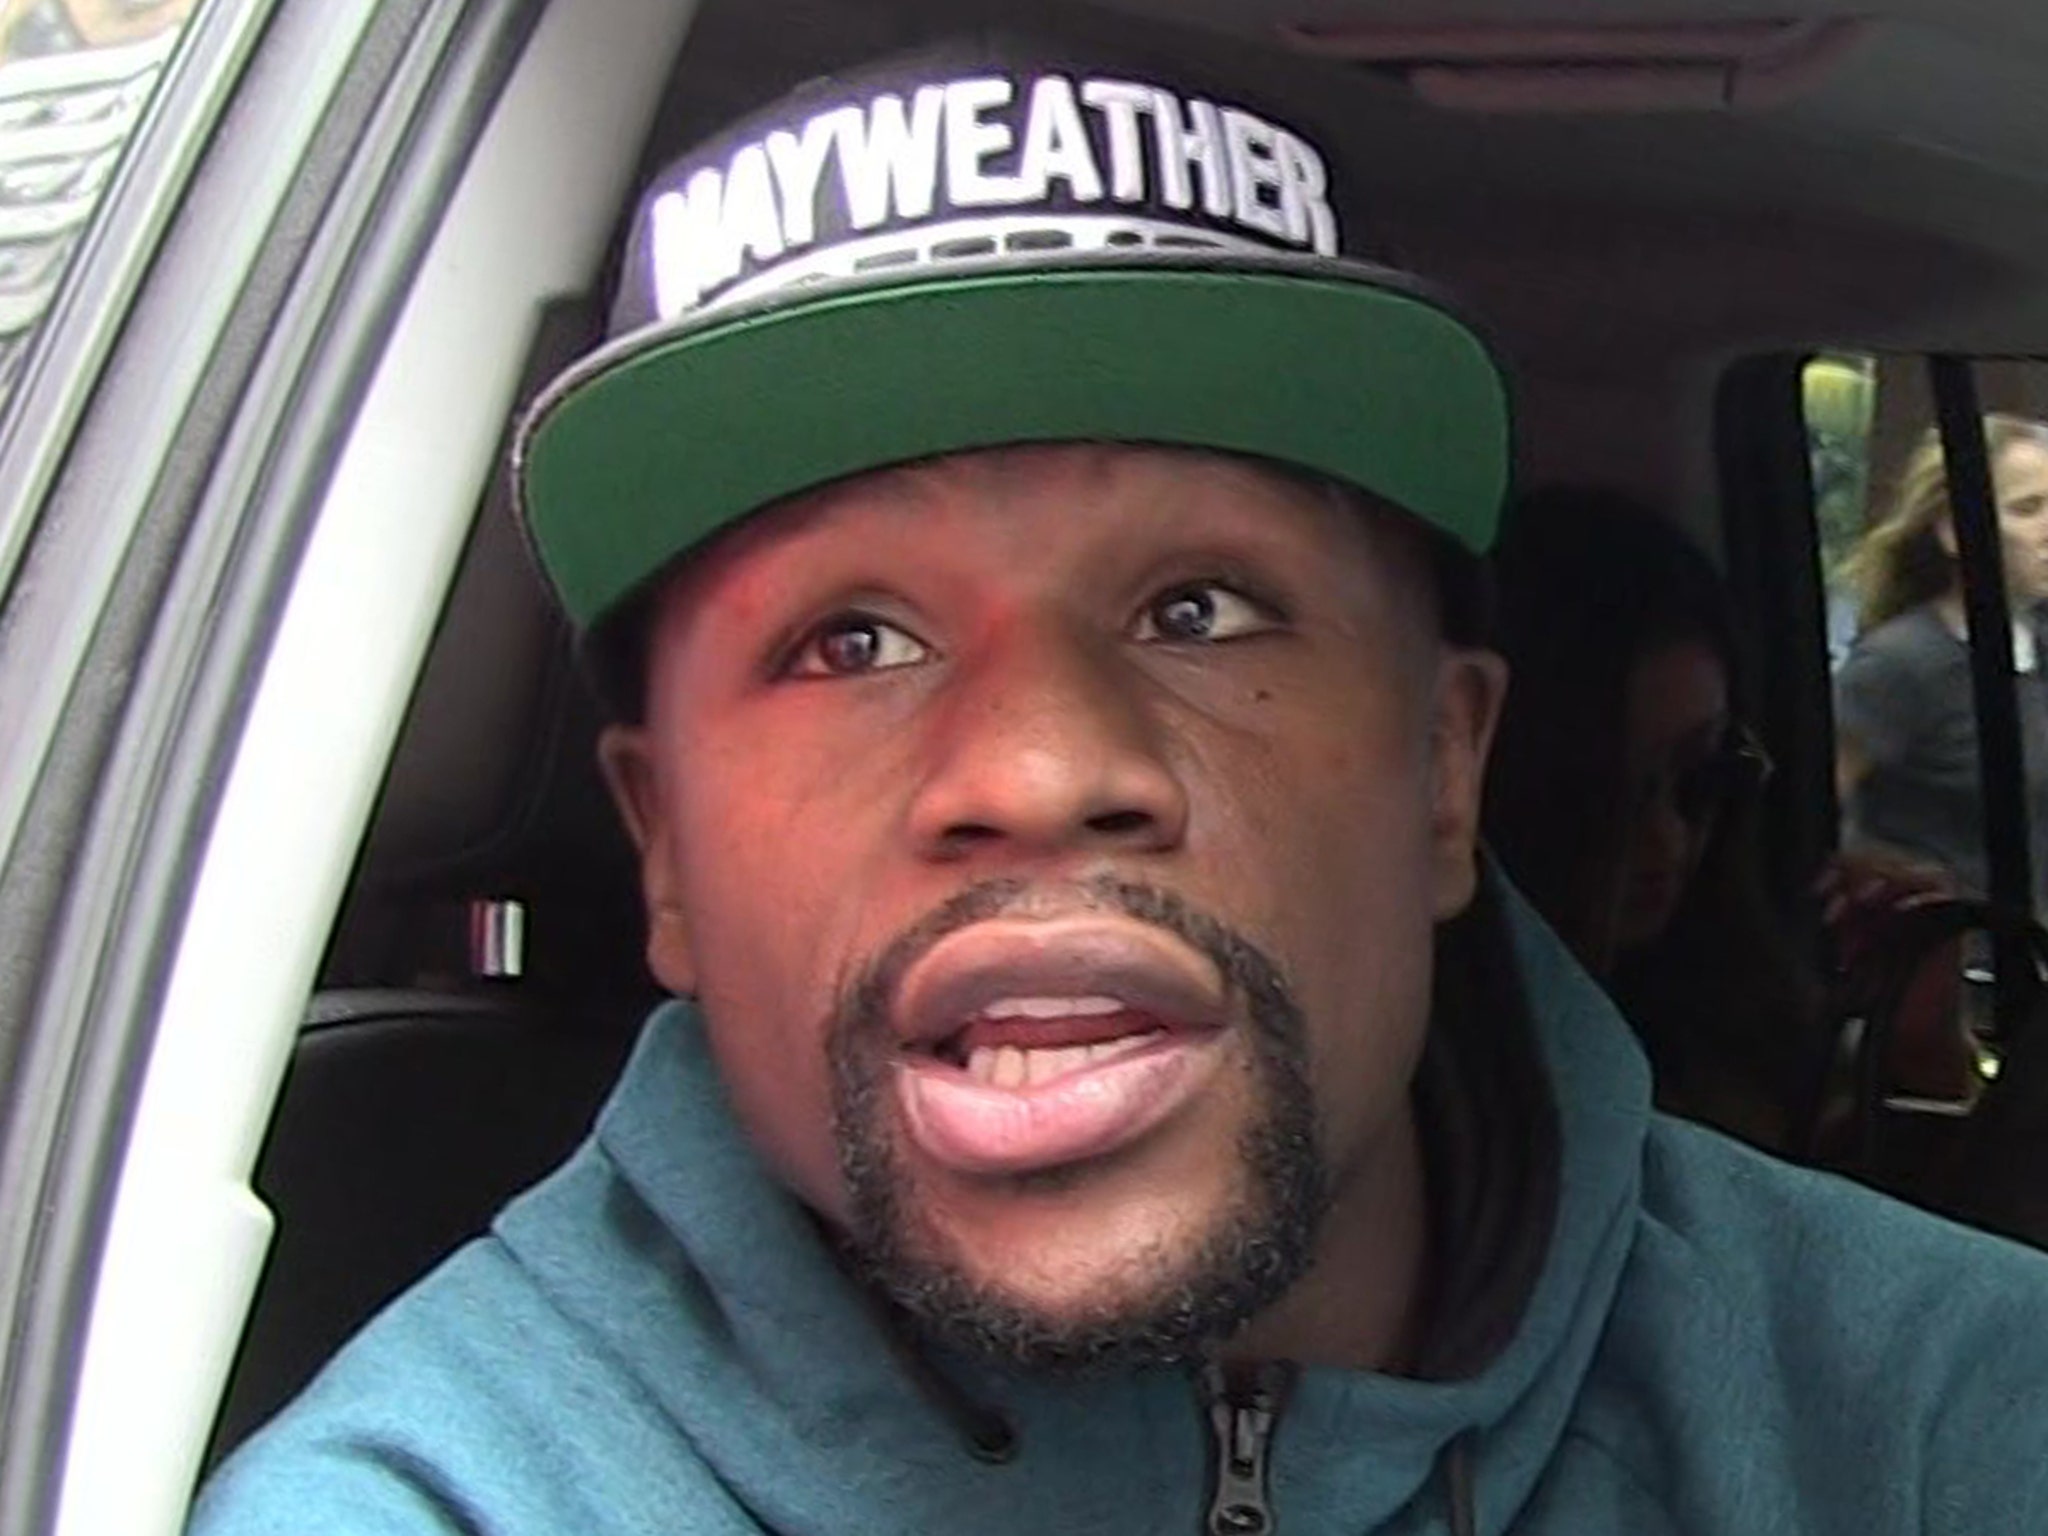 Money Mayweather calls it quits at 49-0, or does he? – Northern Iowan